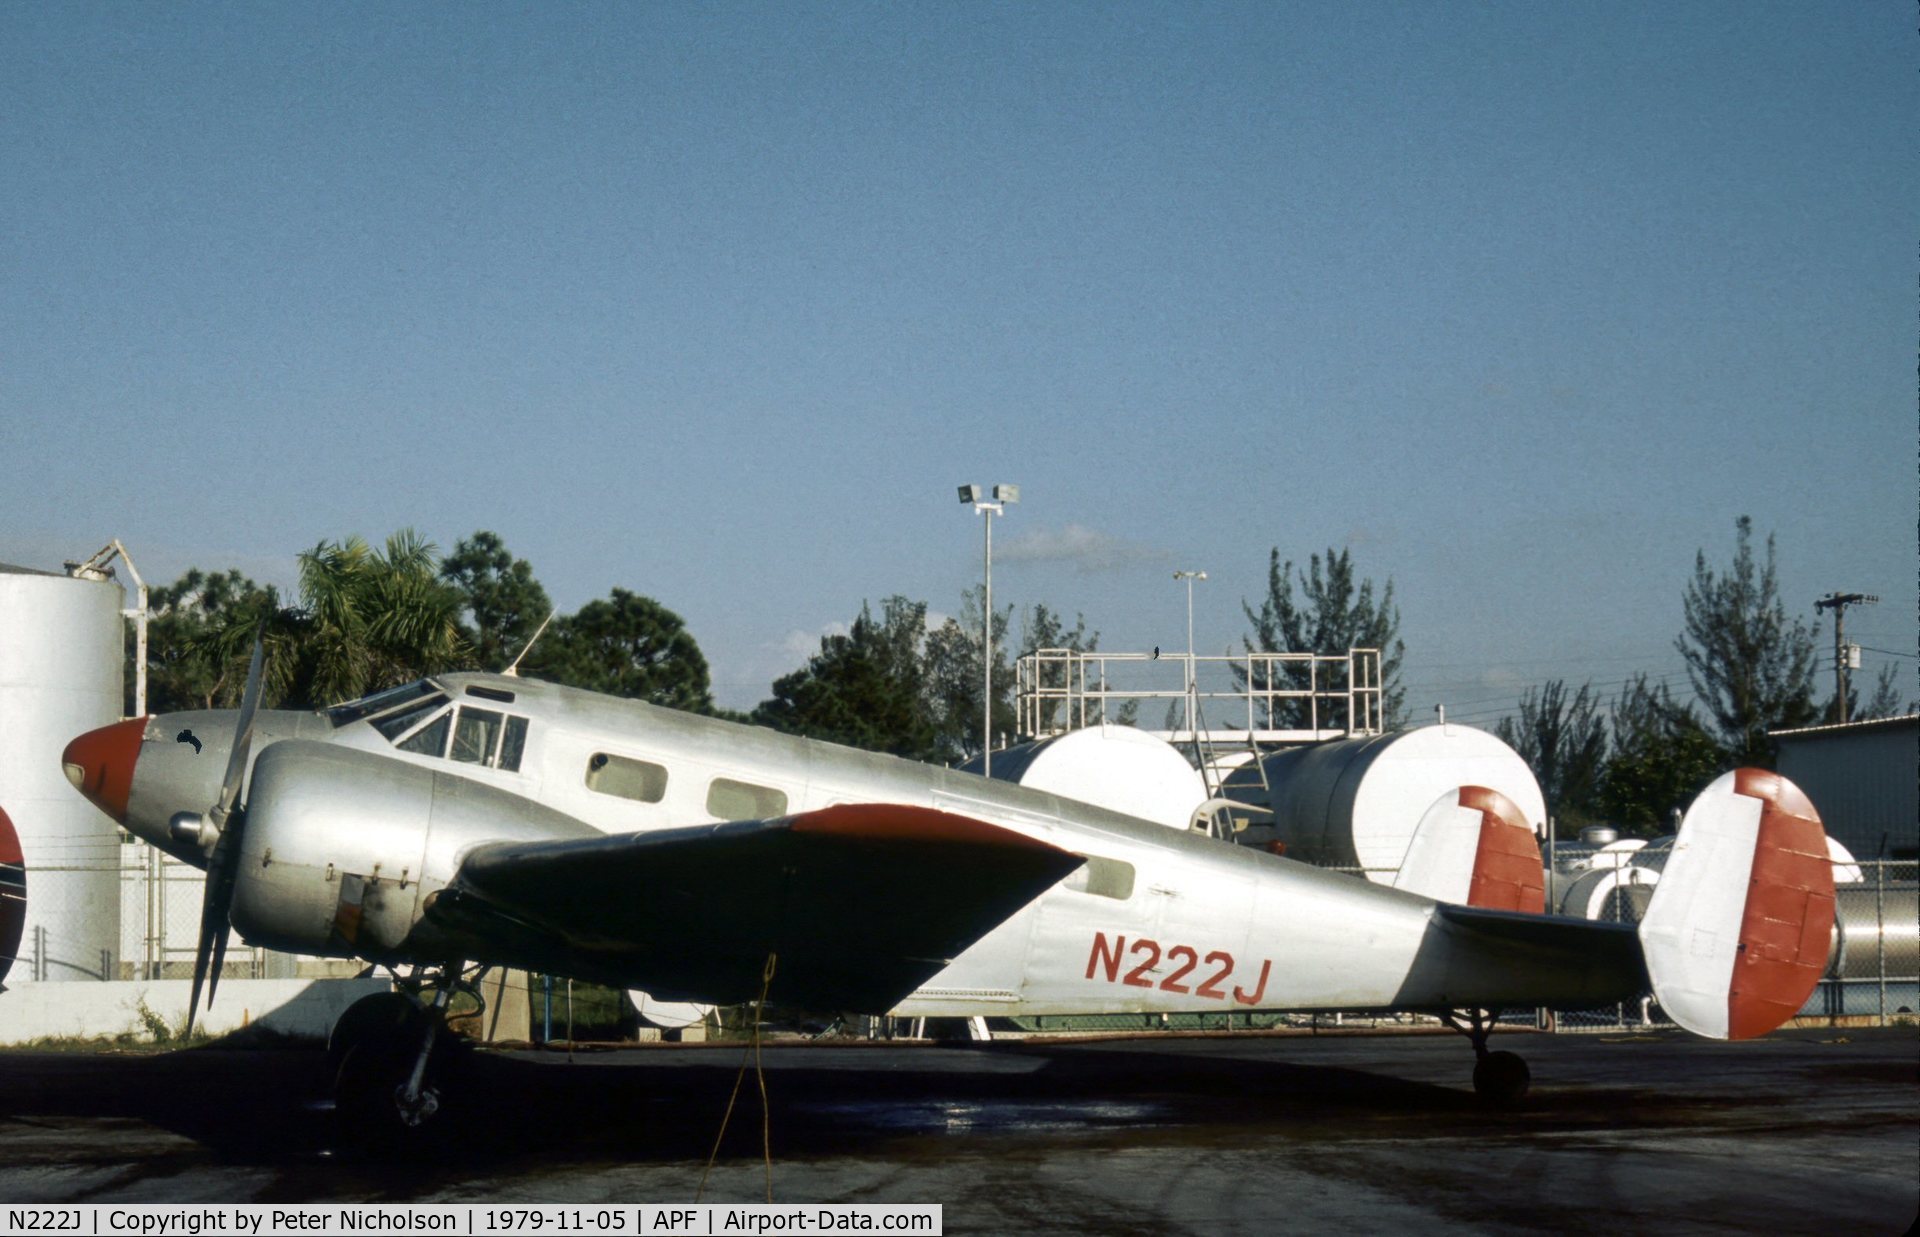 N222J, Beech D18S C/N A-572, Beech D18S of Collier Mosquito Control as seen at Naples in November 1979.